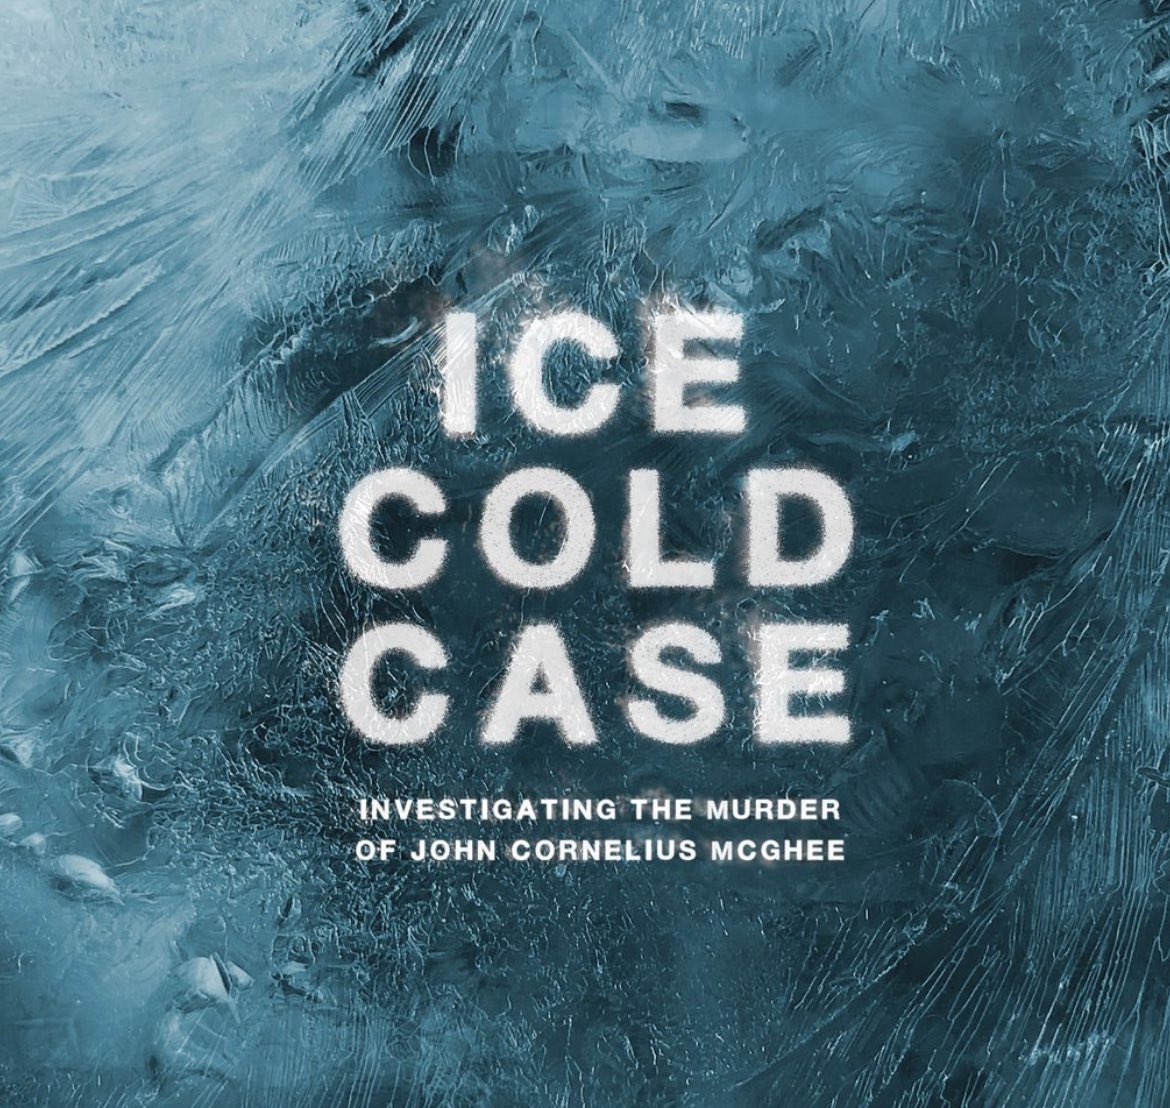 TODAY on THE OUTLIER: Today, we're joined by the fierce MADISON MCGHEE, host of the podcast, ICE COLD CASE, dedicated to finding her father's killer. MADISON'S father, JOHN CORNELIUS MCGHEE, was murdered in 2002 in his own doorway in Belmont County, Ohio. What MADISON has been